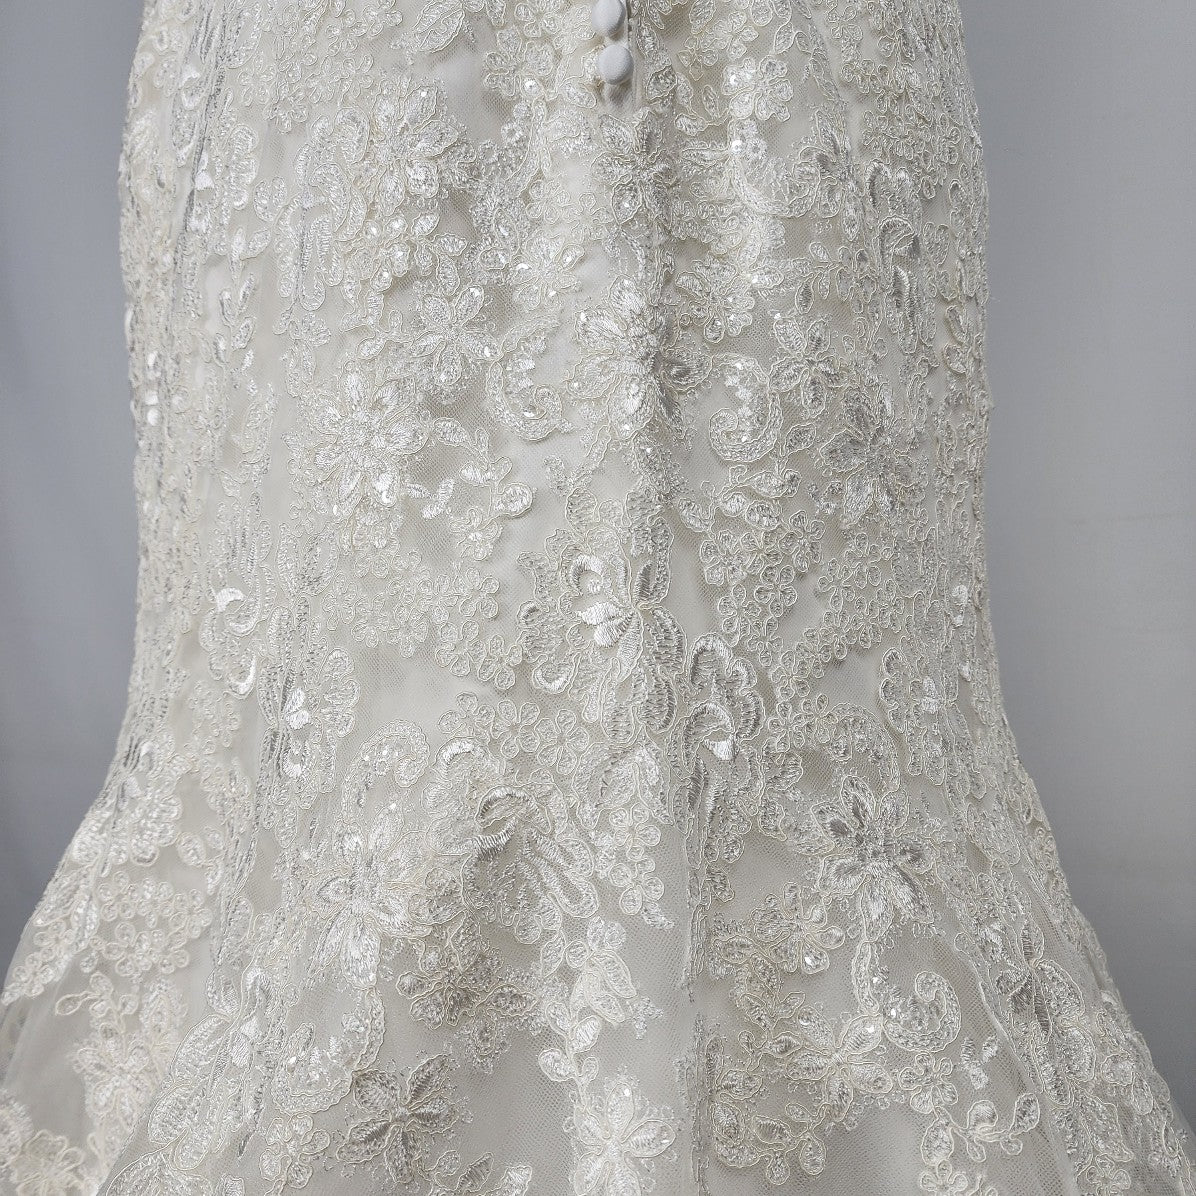 Allure Romance Ivory Wedding Gown 2807 Mermaid Lace Size M